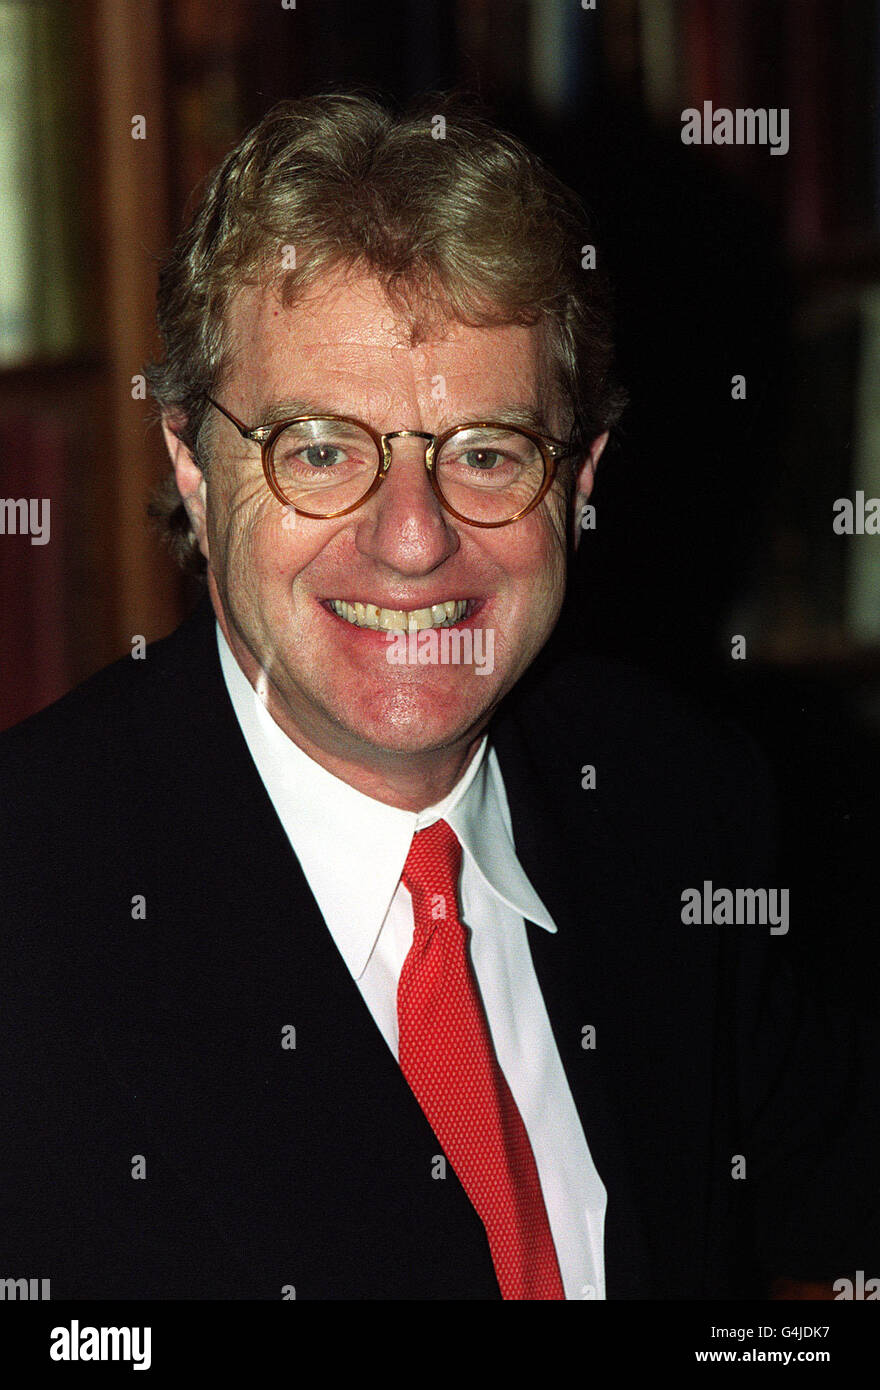 Jerry Springer, host of the infamous American chat show 'The Jerry Springer Show', during a visit to the Oxford Union at Oxford University. * 23/01/2003: Talk show host Jerry Springer has a secret of his own to share: he is considering running for the US Senate next year. Springer, a Democrat, said he will decide by the summer whether to challenge George Voinovich, a Republican who has said he ll run for a second term in 2004. Stock Photo